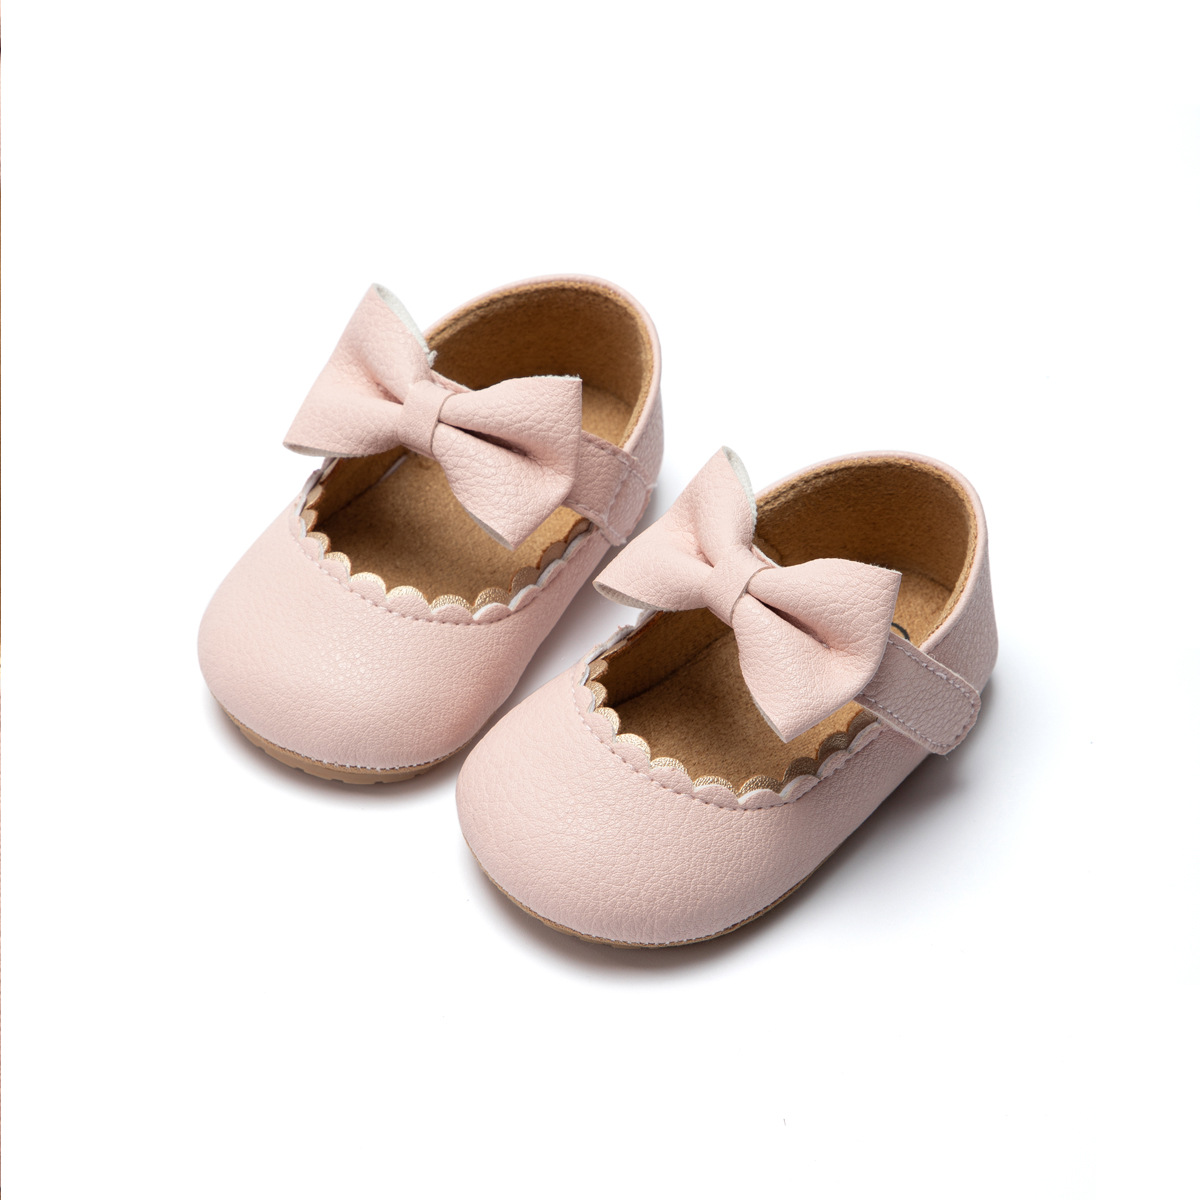 Annie & Charles® Crawling Shoes Baby Shoes